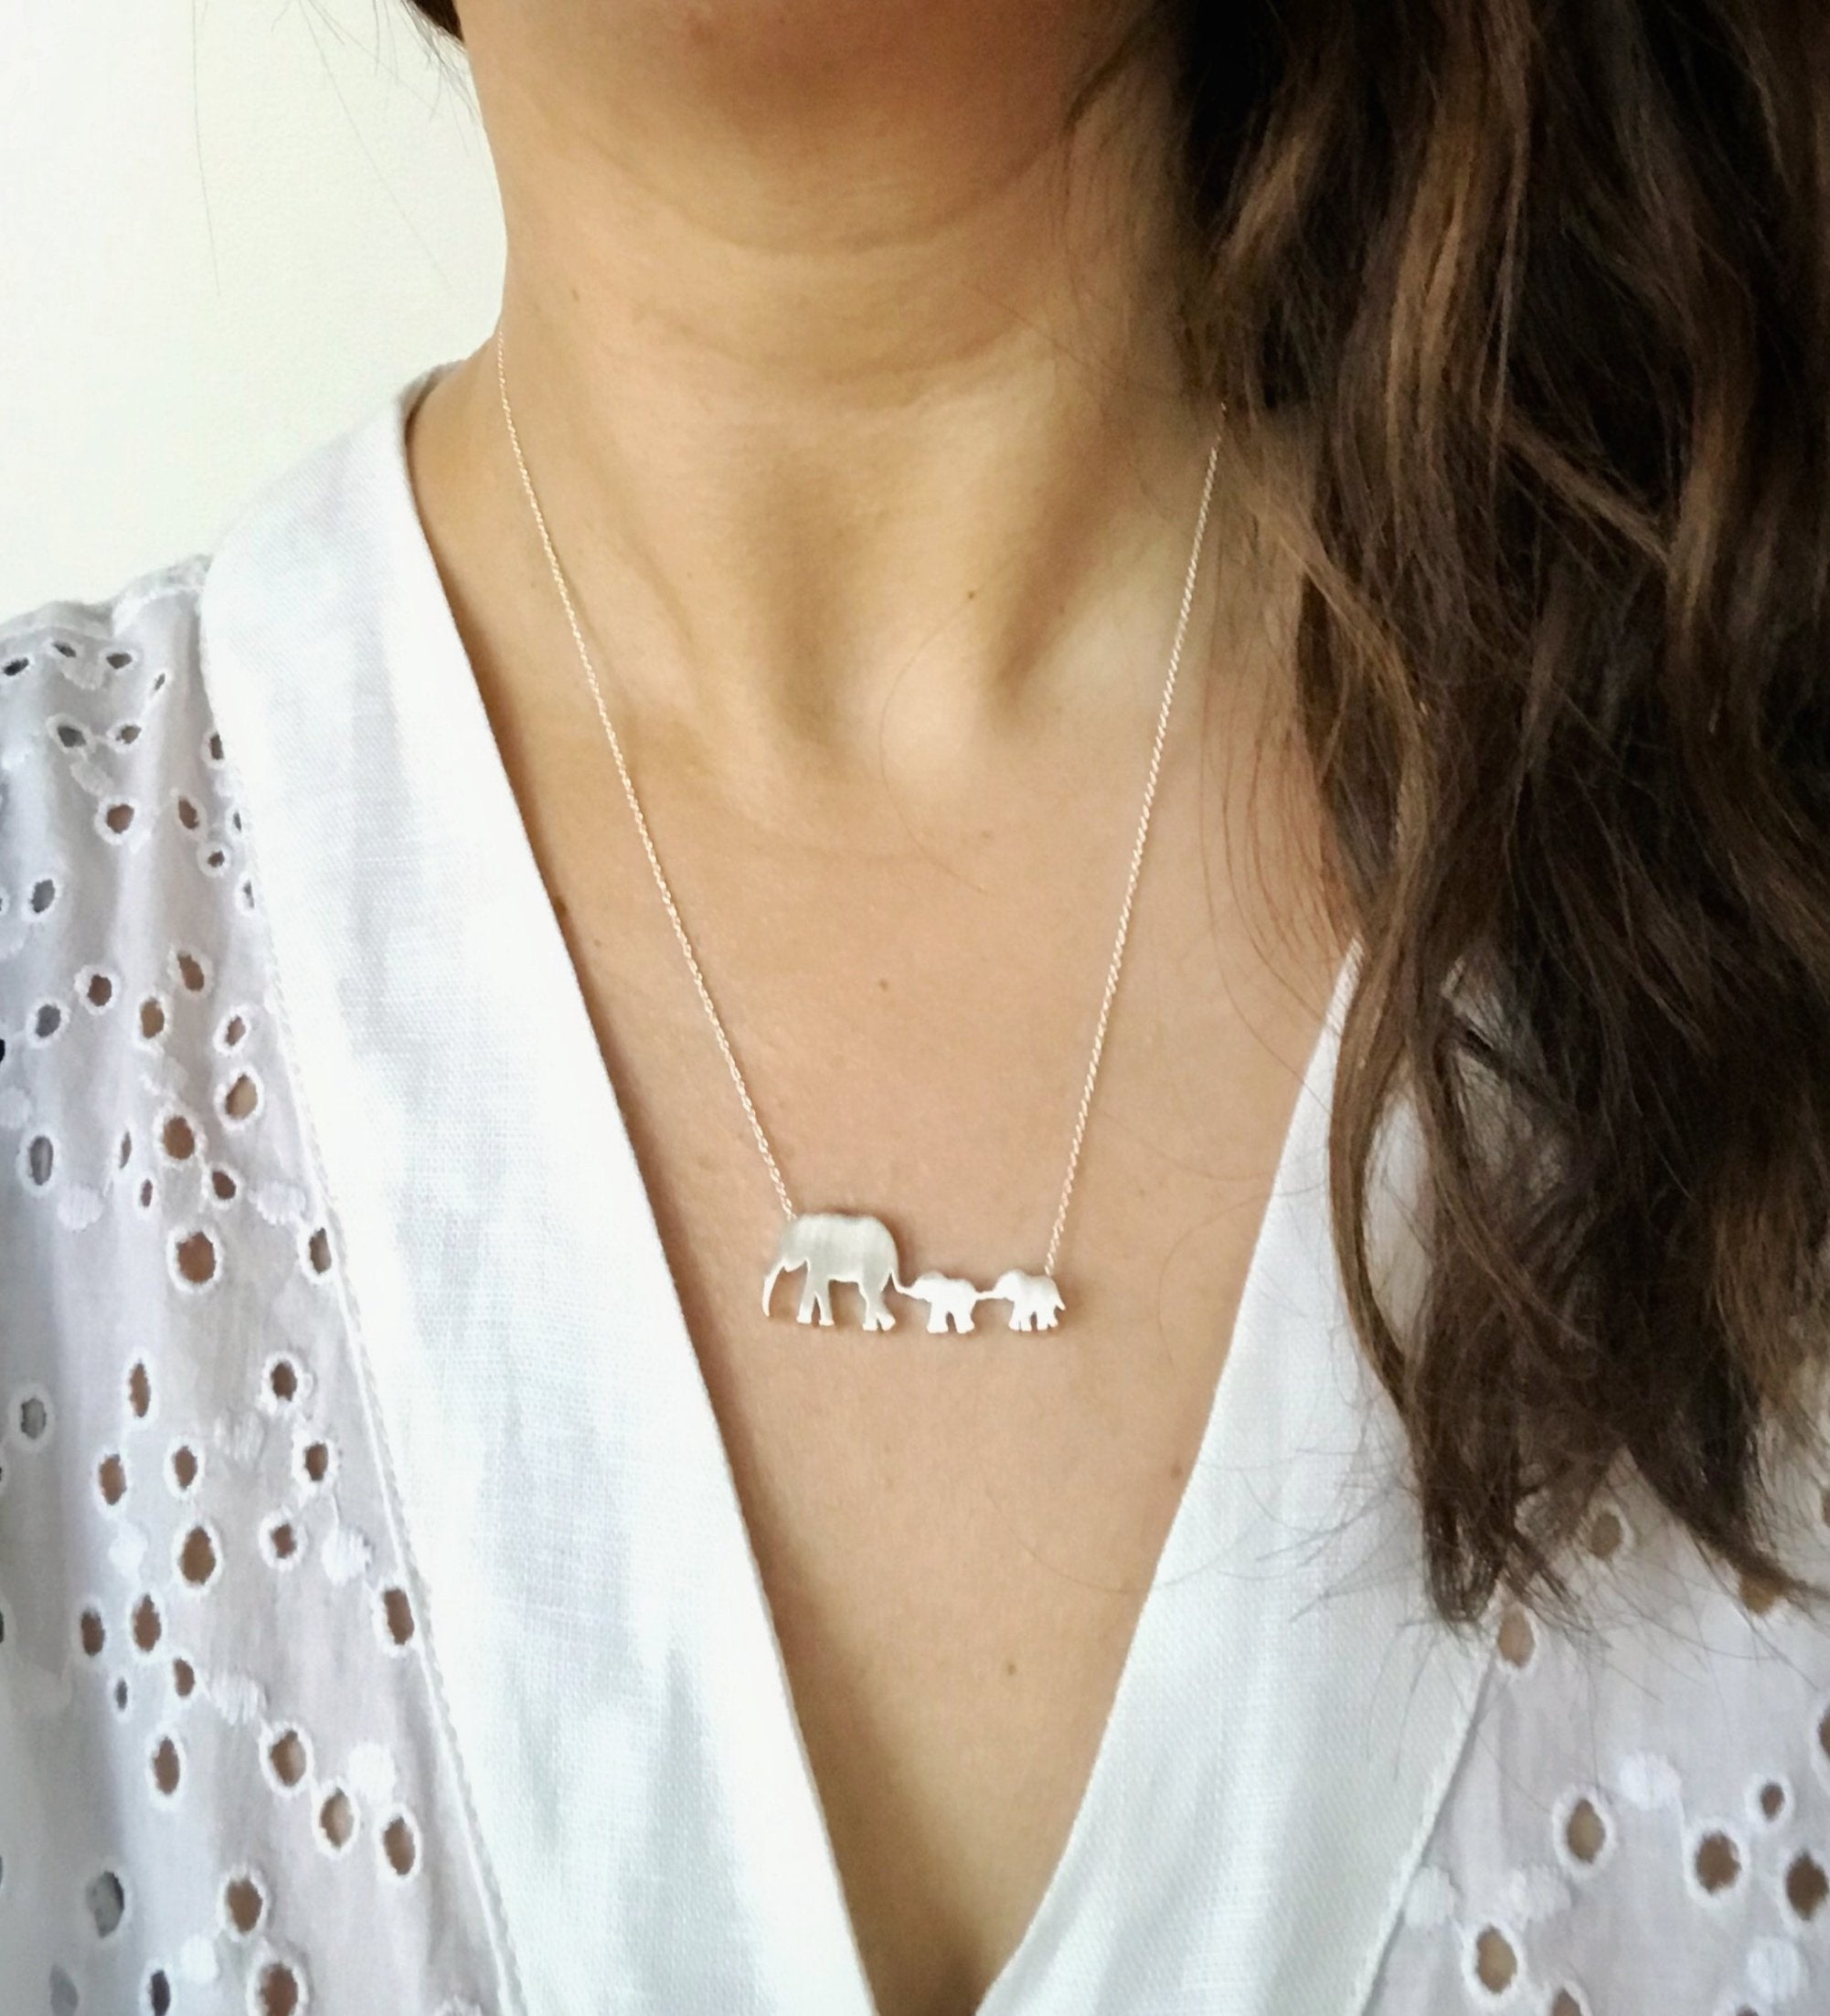 mother and two baby elephants necklace